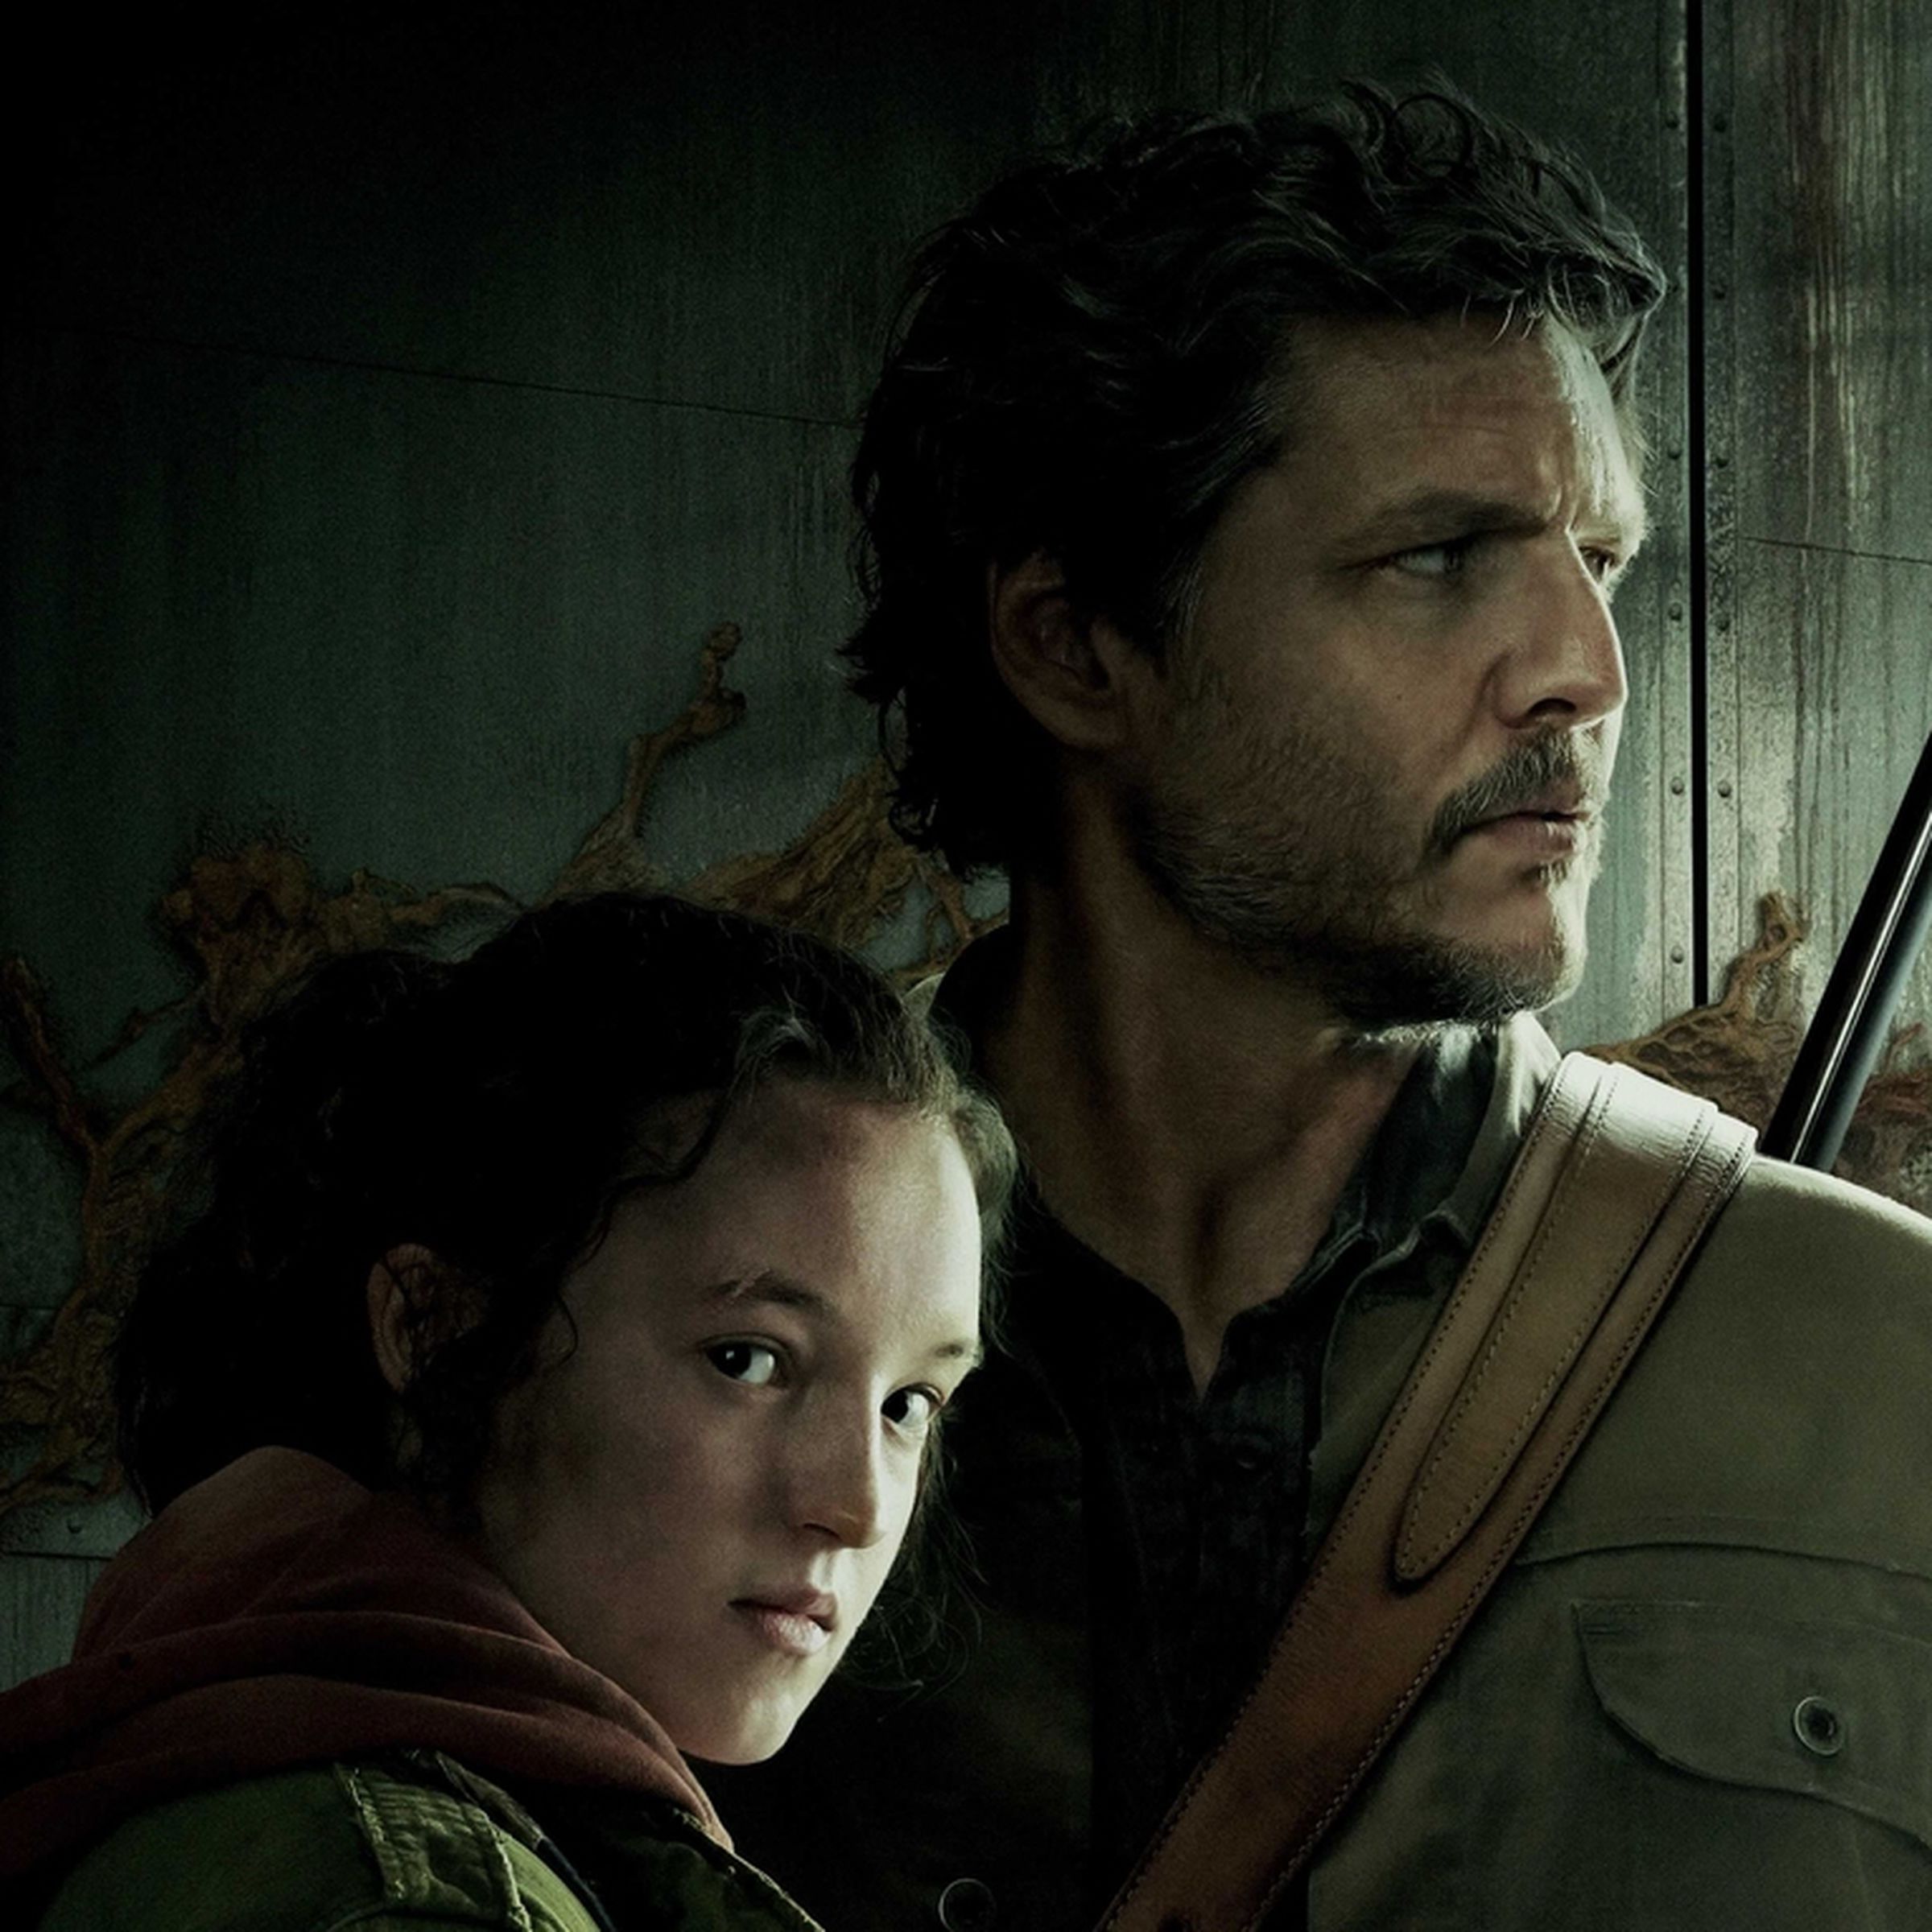 Bella Ramsey (Ellie) with her head lying against Pedro Pascal’s (Joel) chest as he holds up a gun and looks the other way.